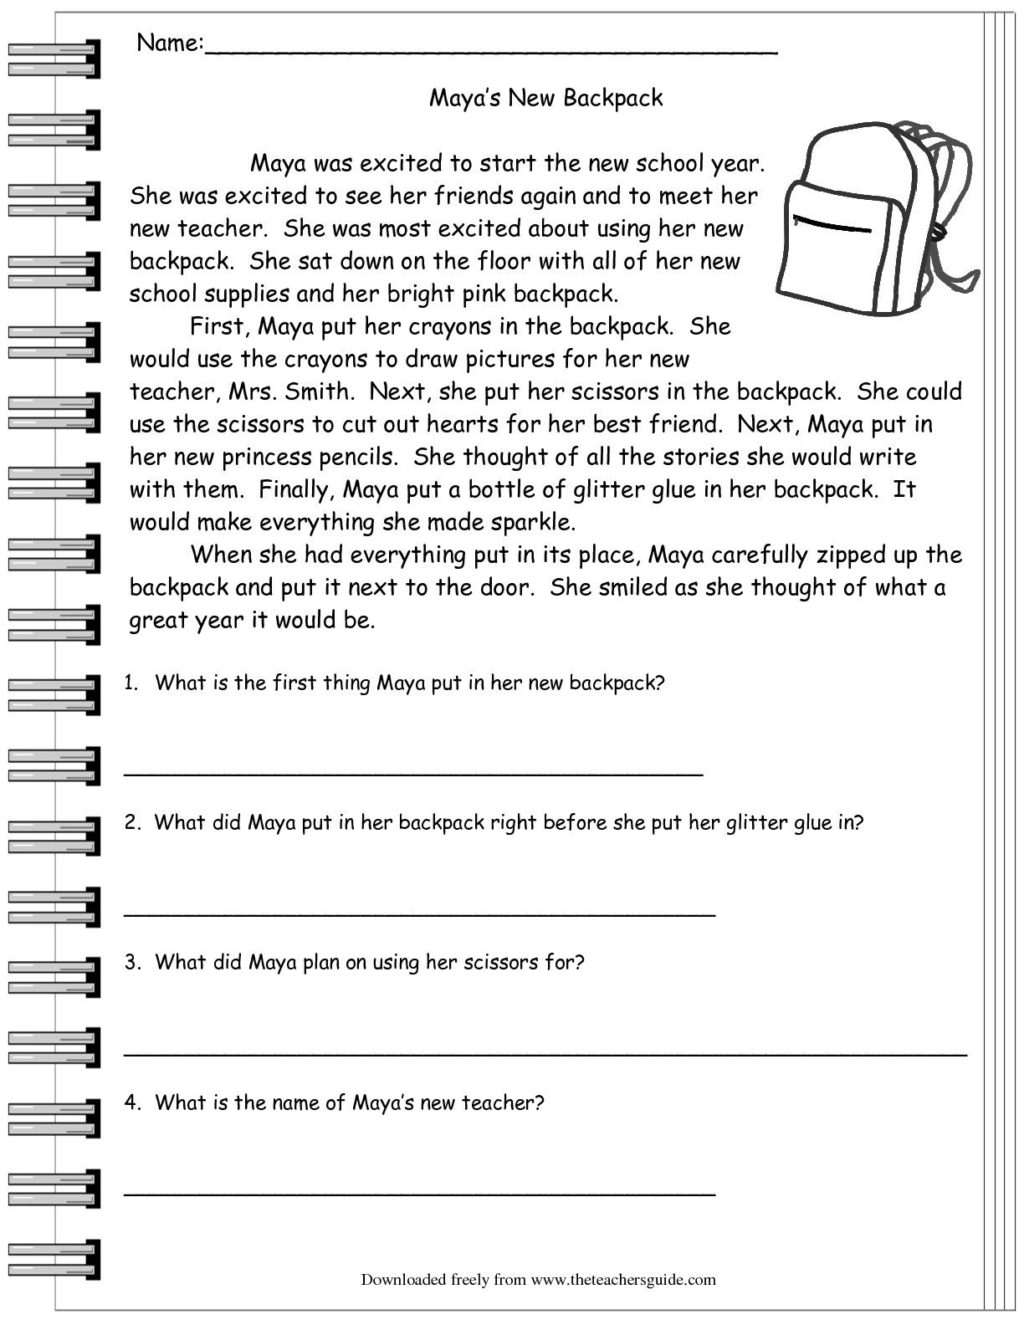 halloween-reading-comprehension-worksheets-for-third-grade